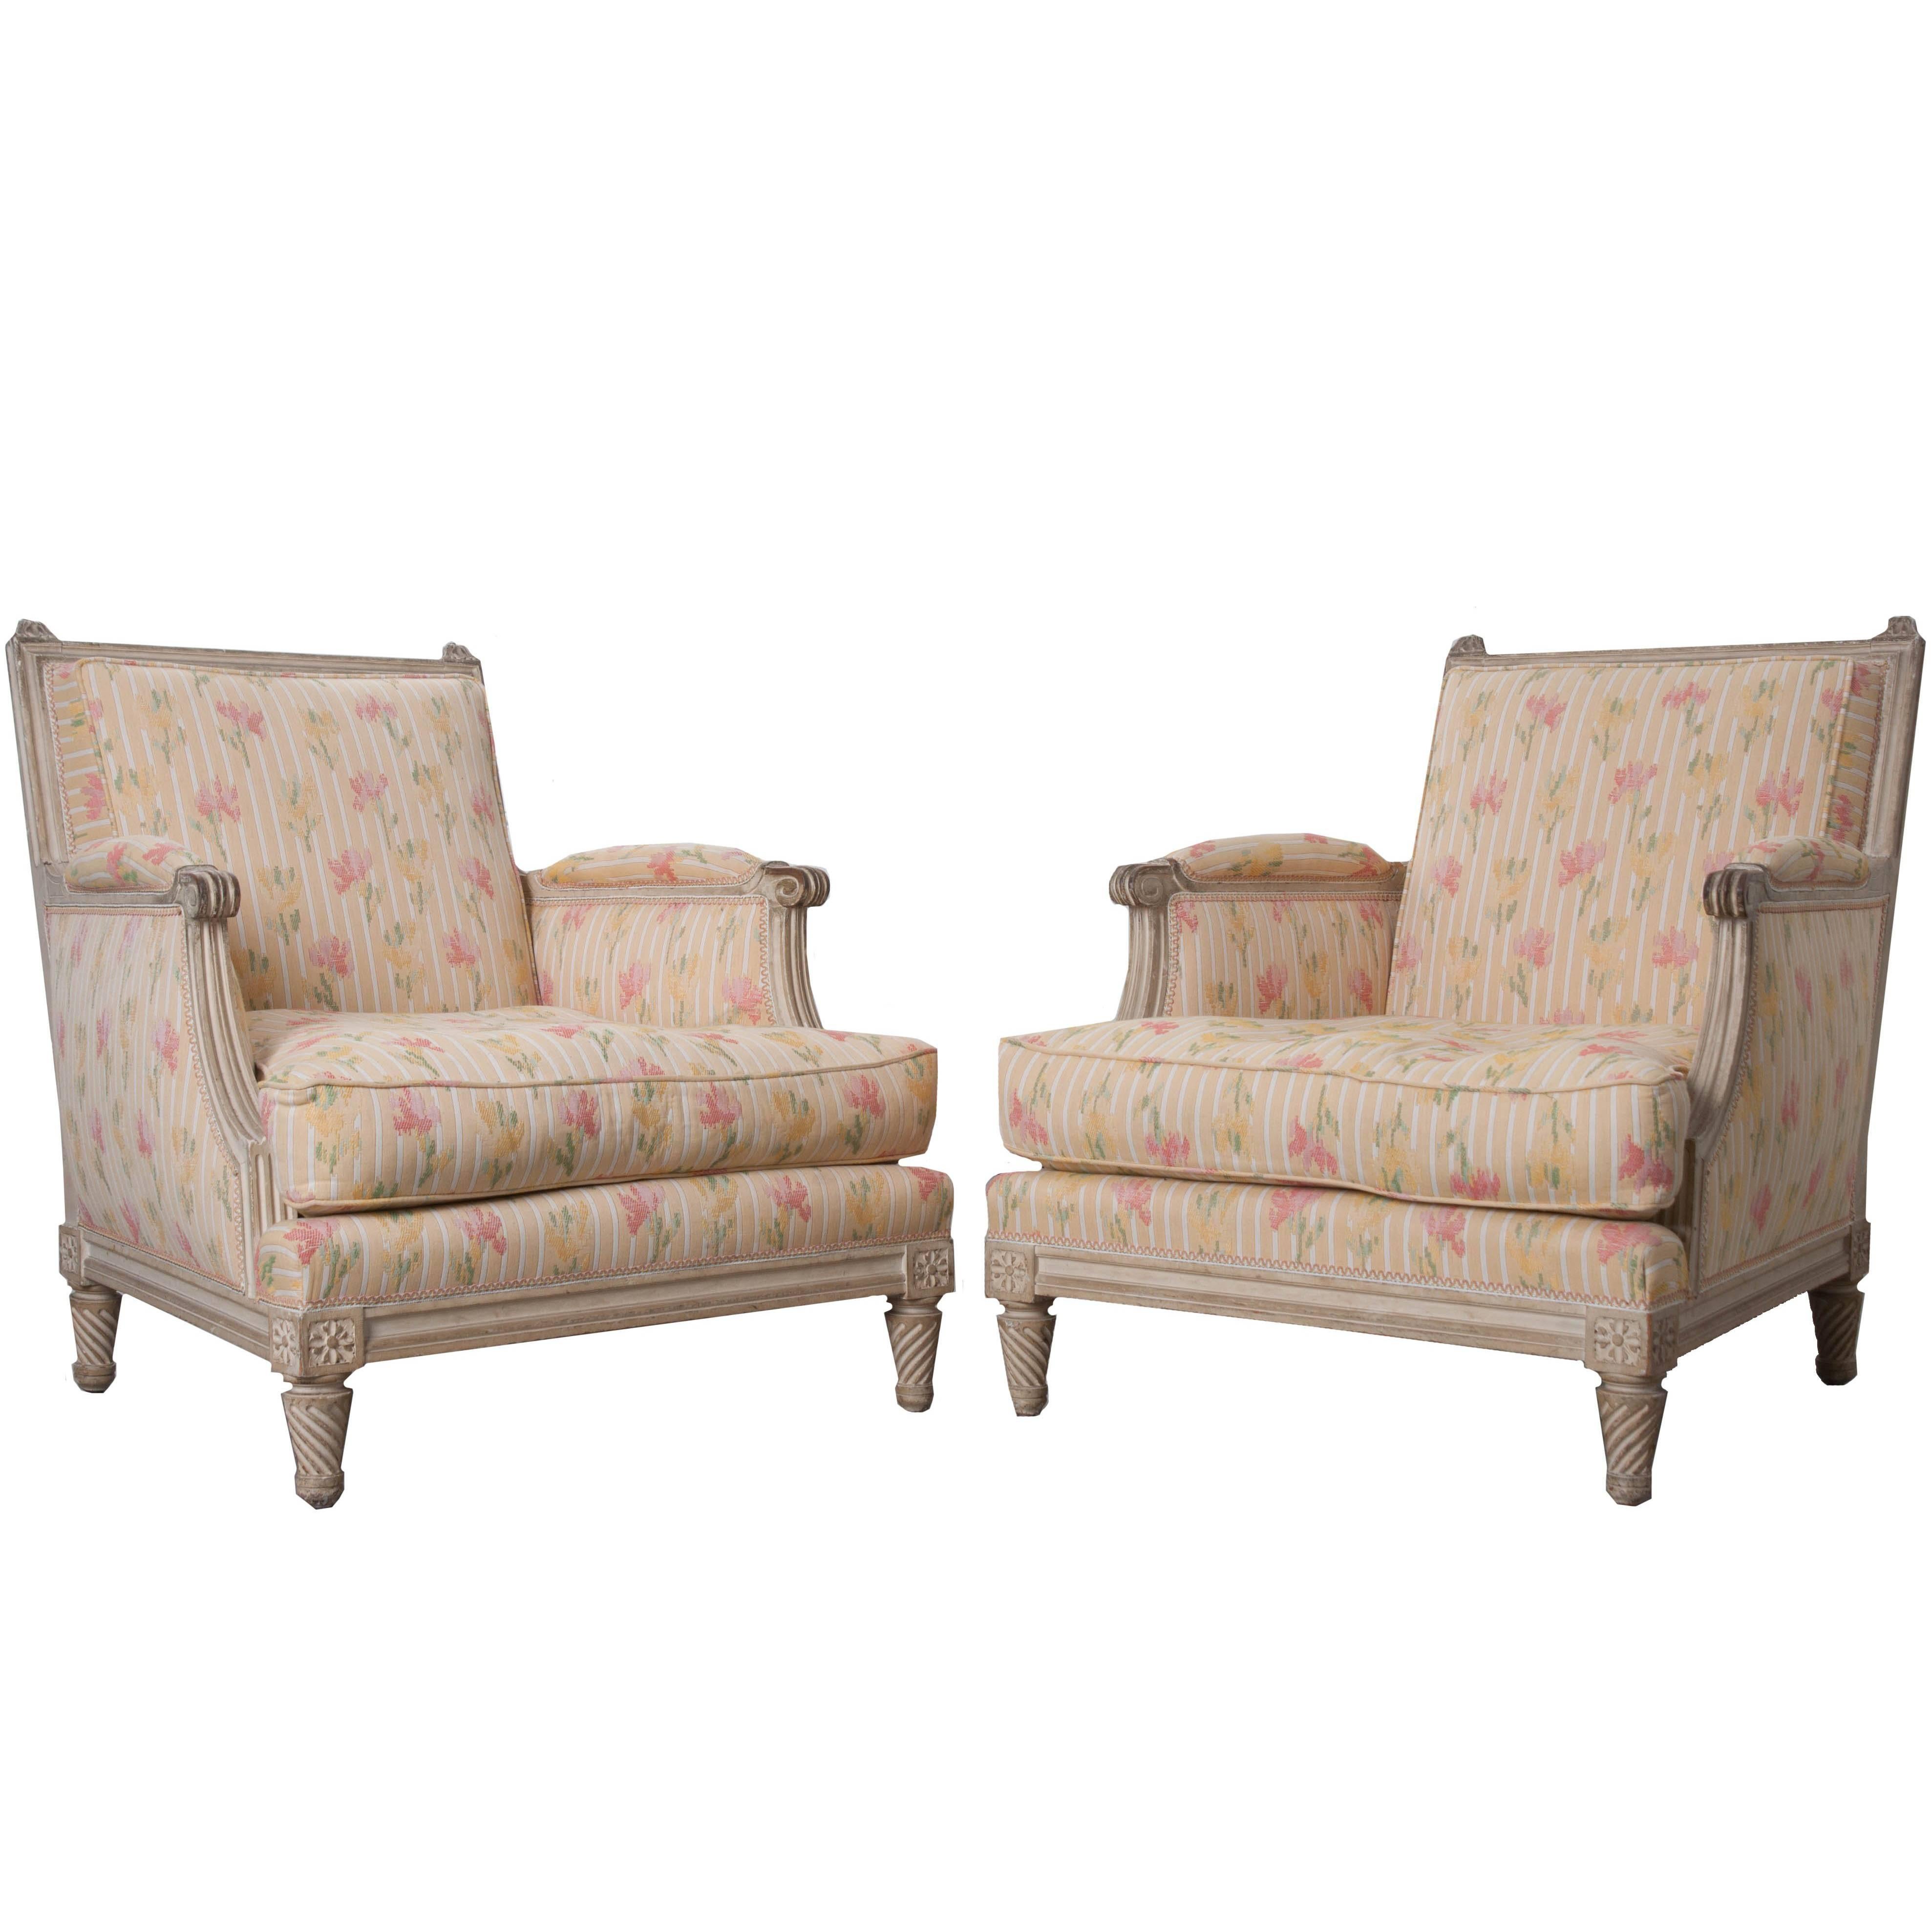 Pair of French Painted Louis XVI Style Bergères